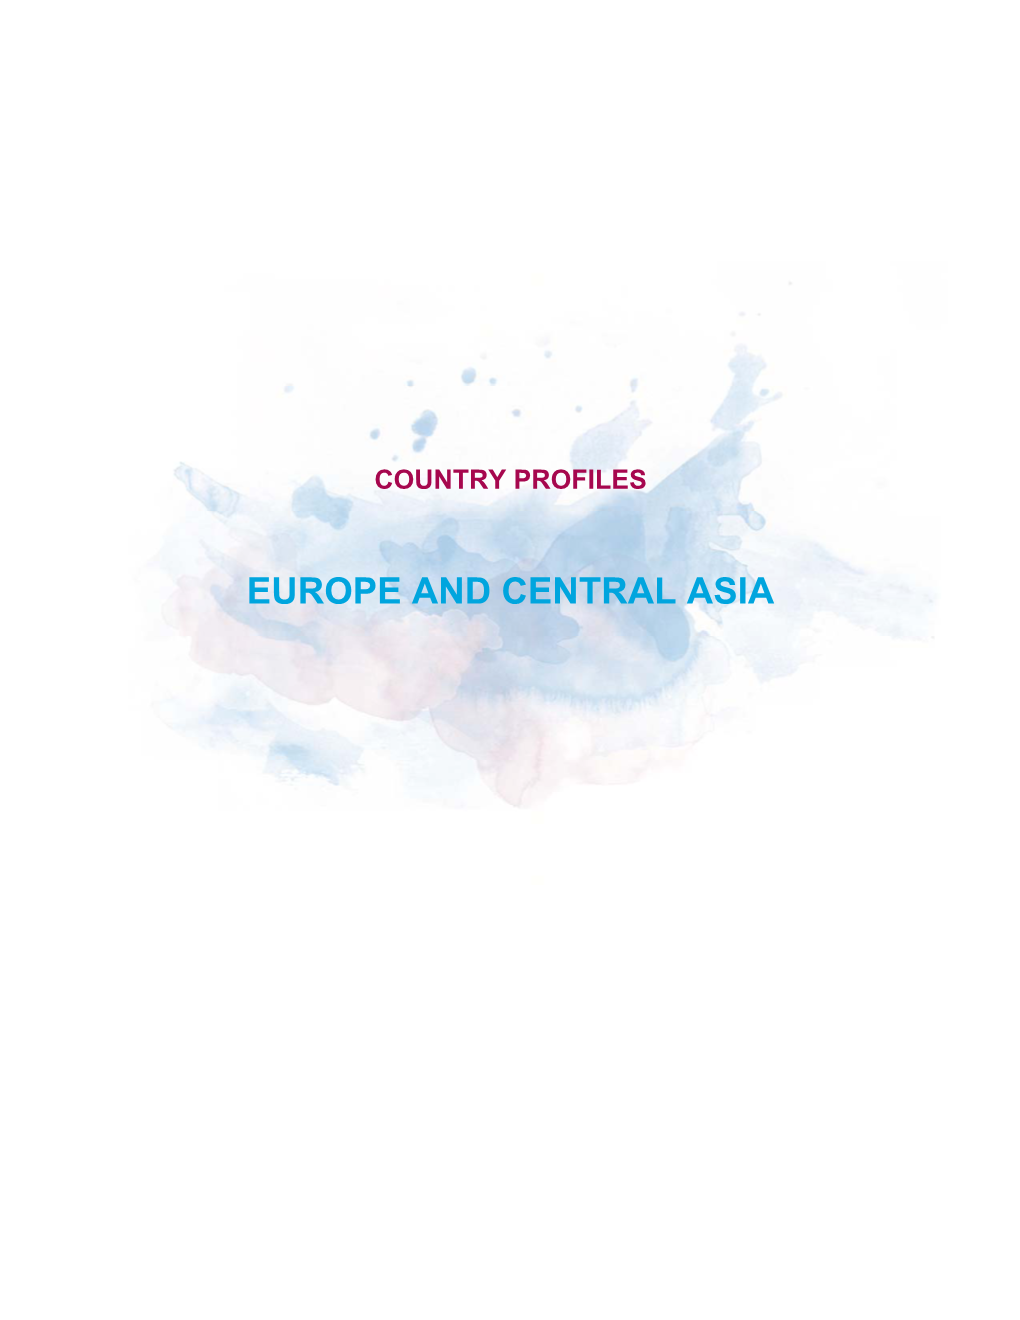 Europe and Central Asia